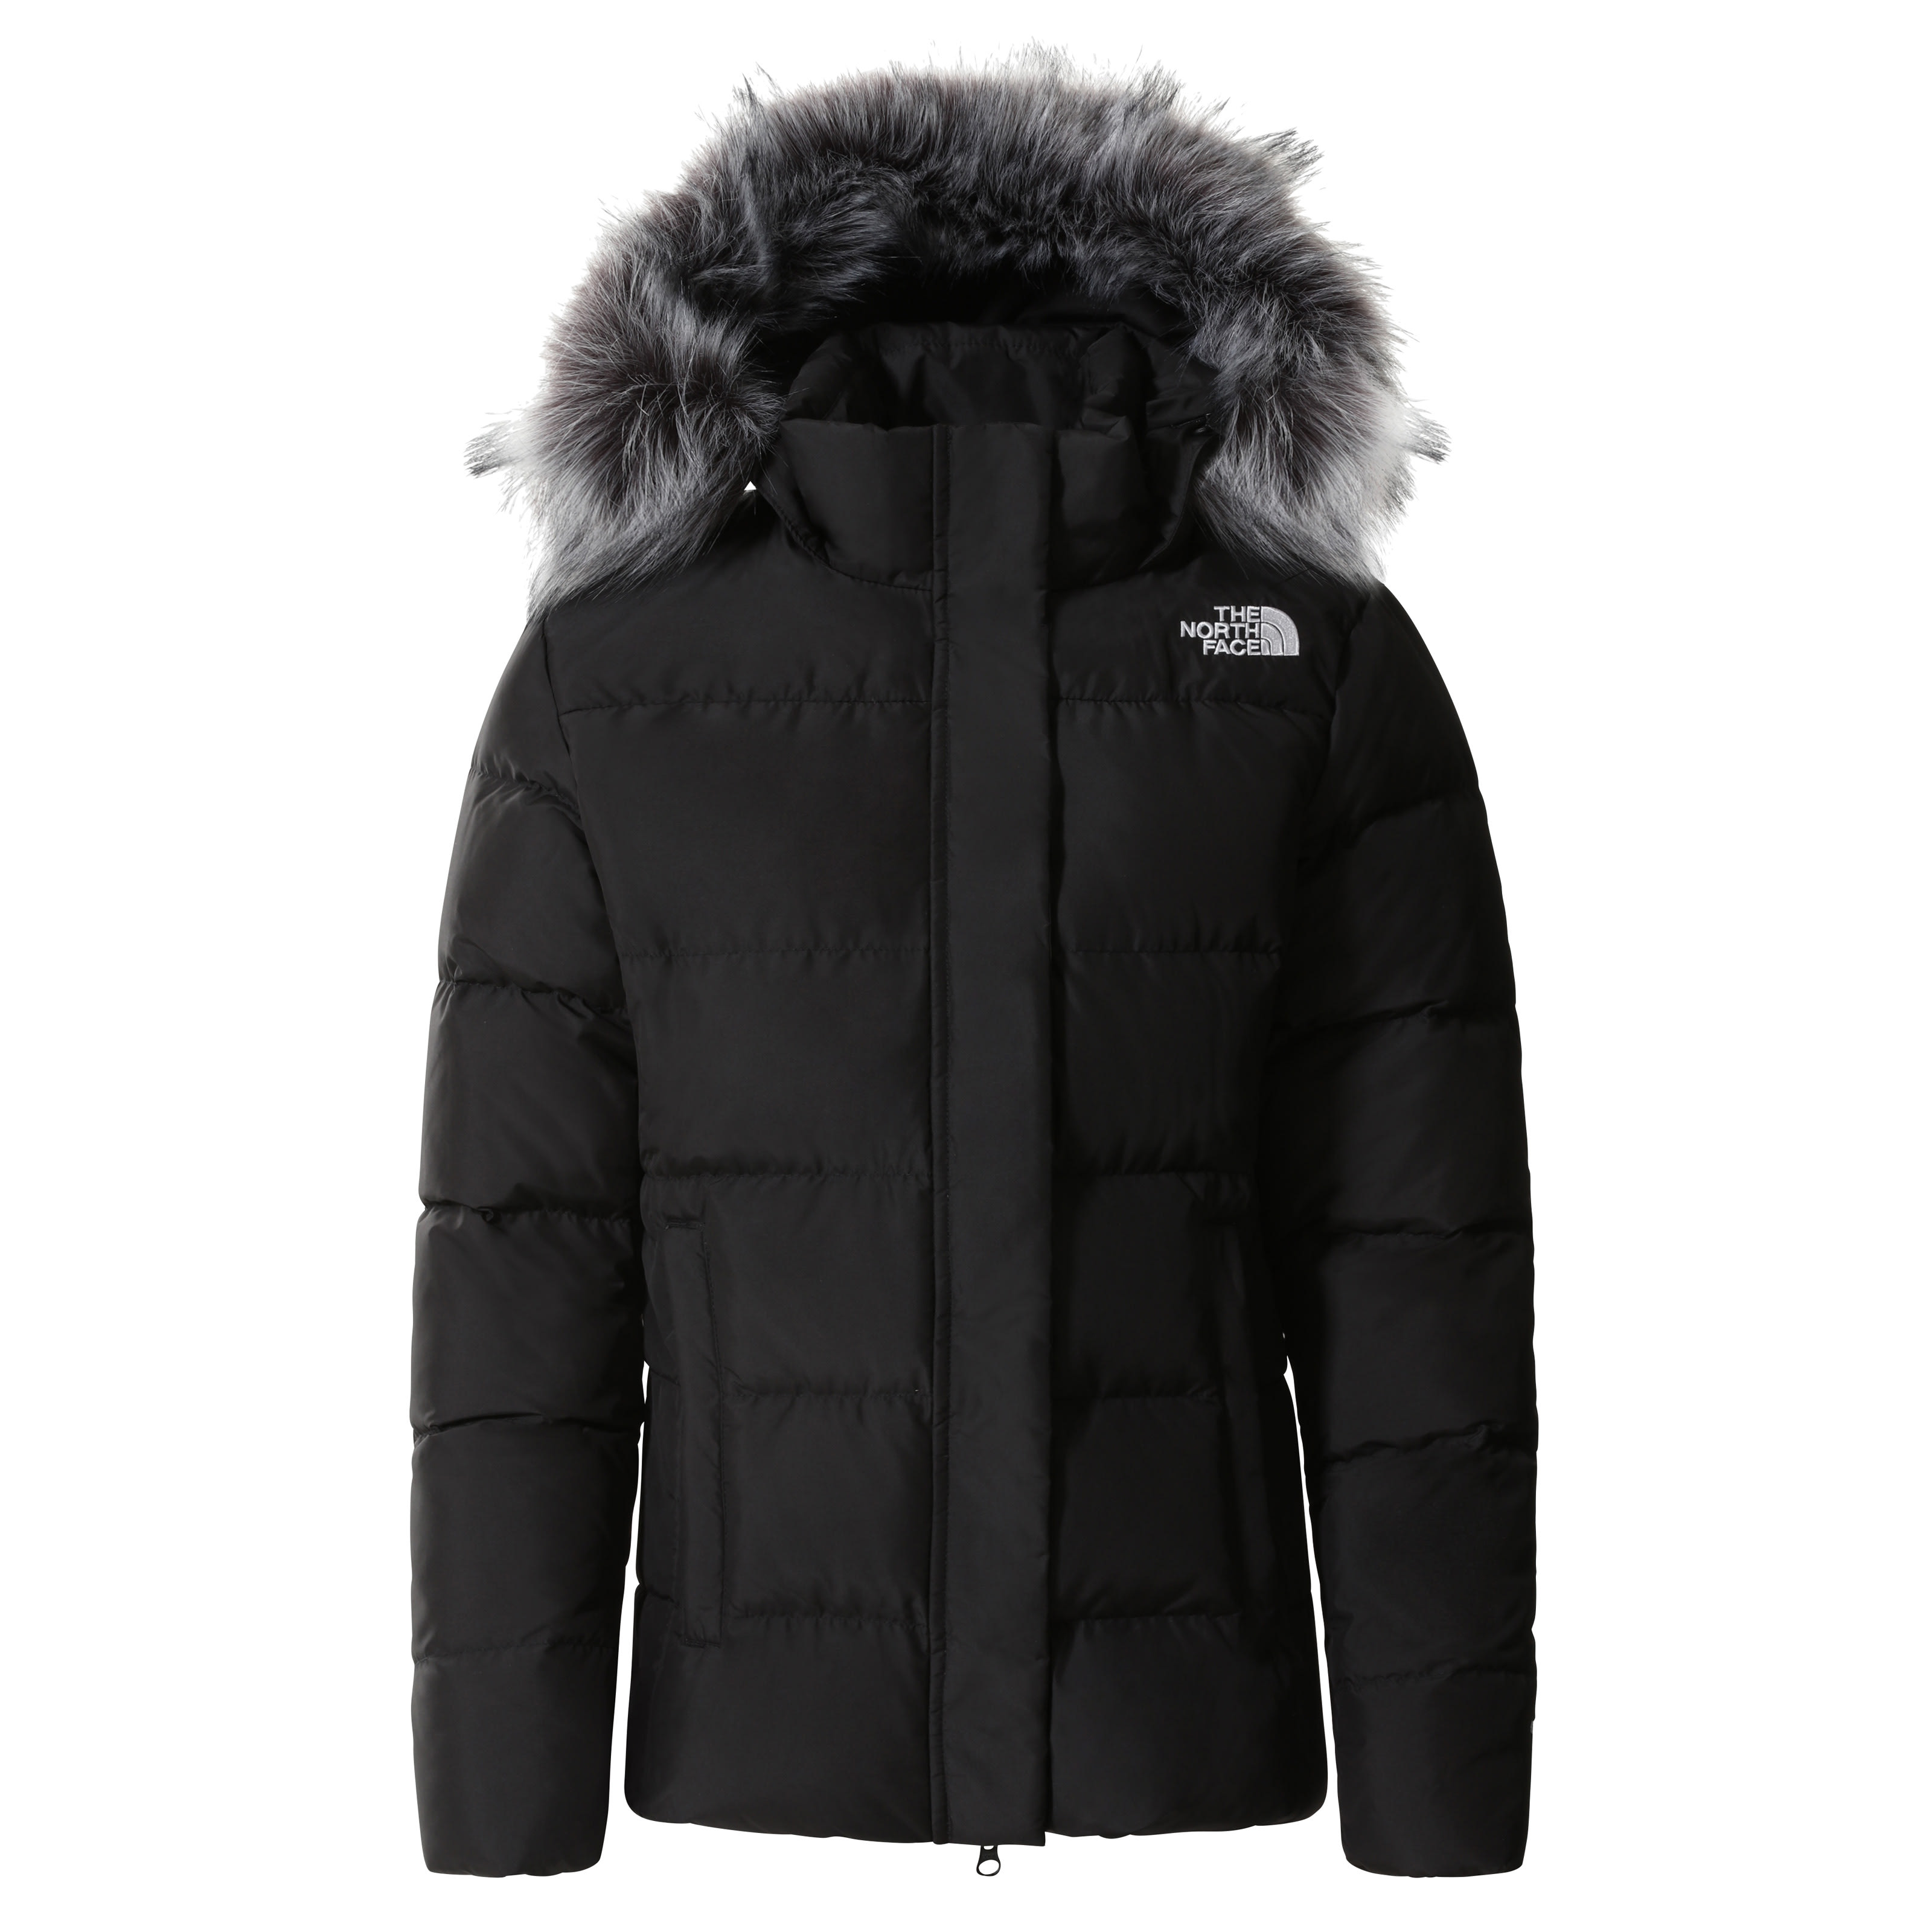 The North Face Women's Gotham Jacket 